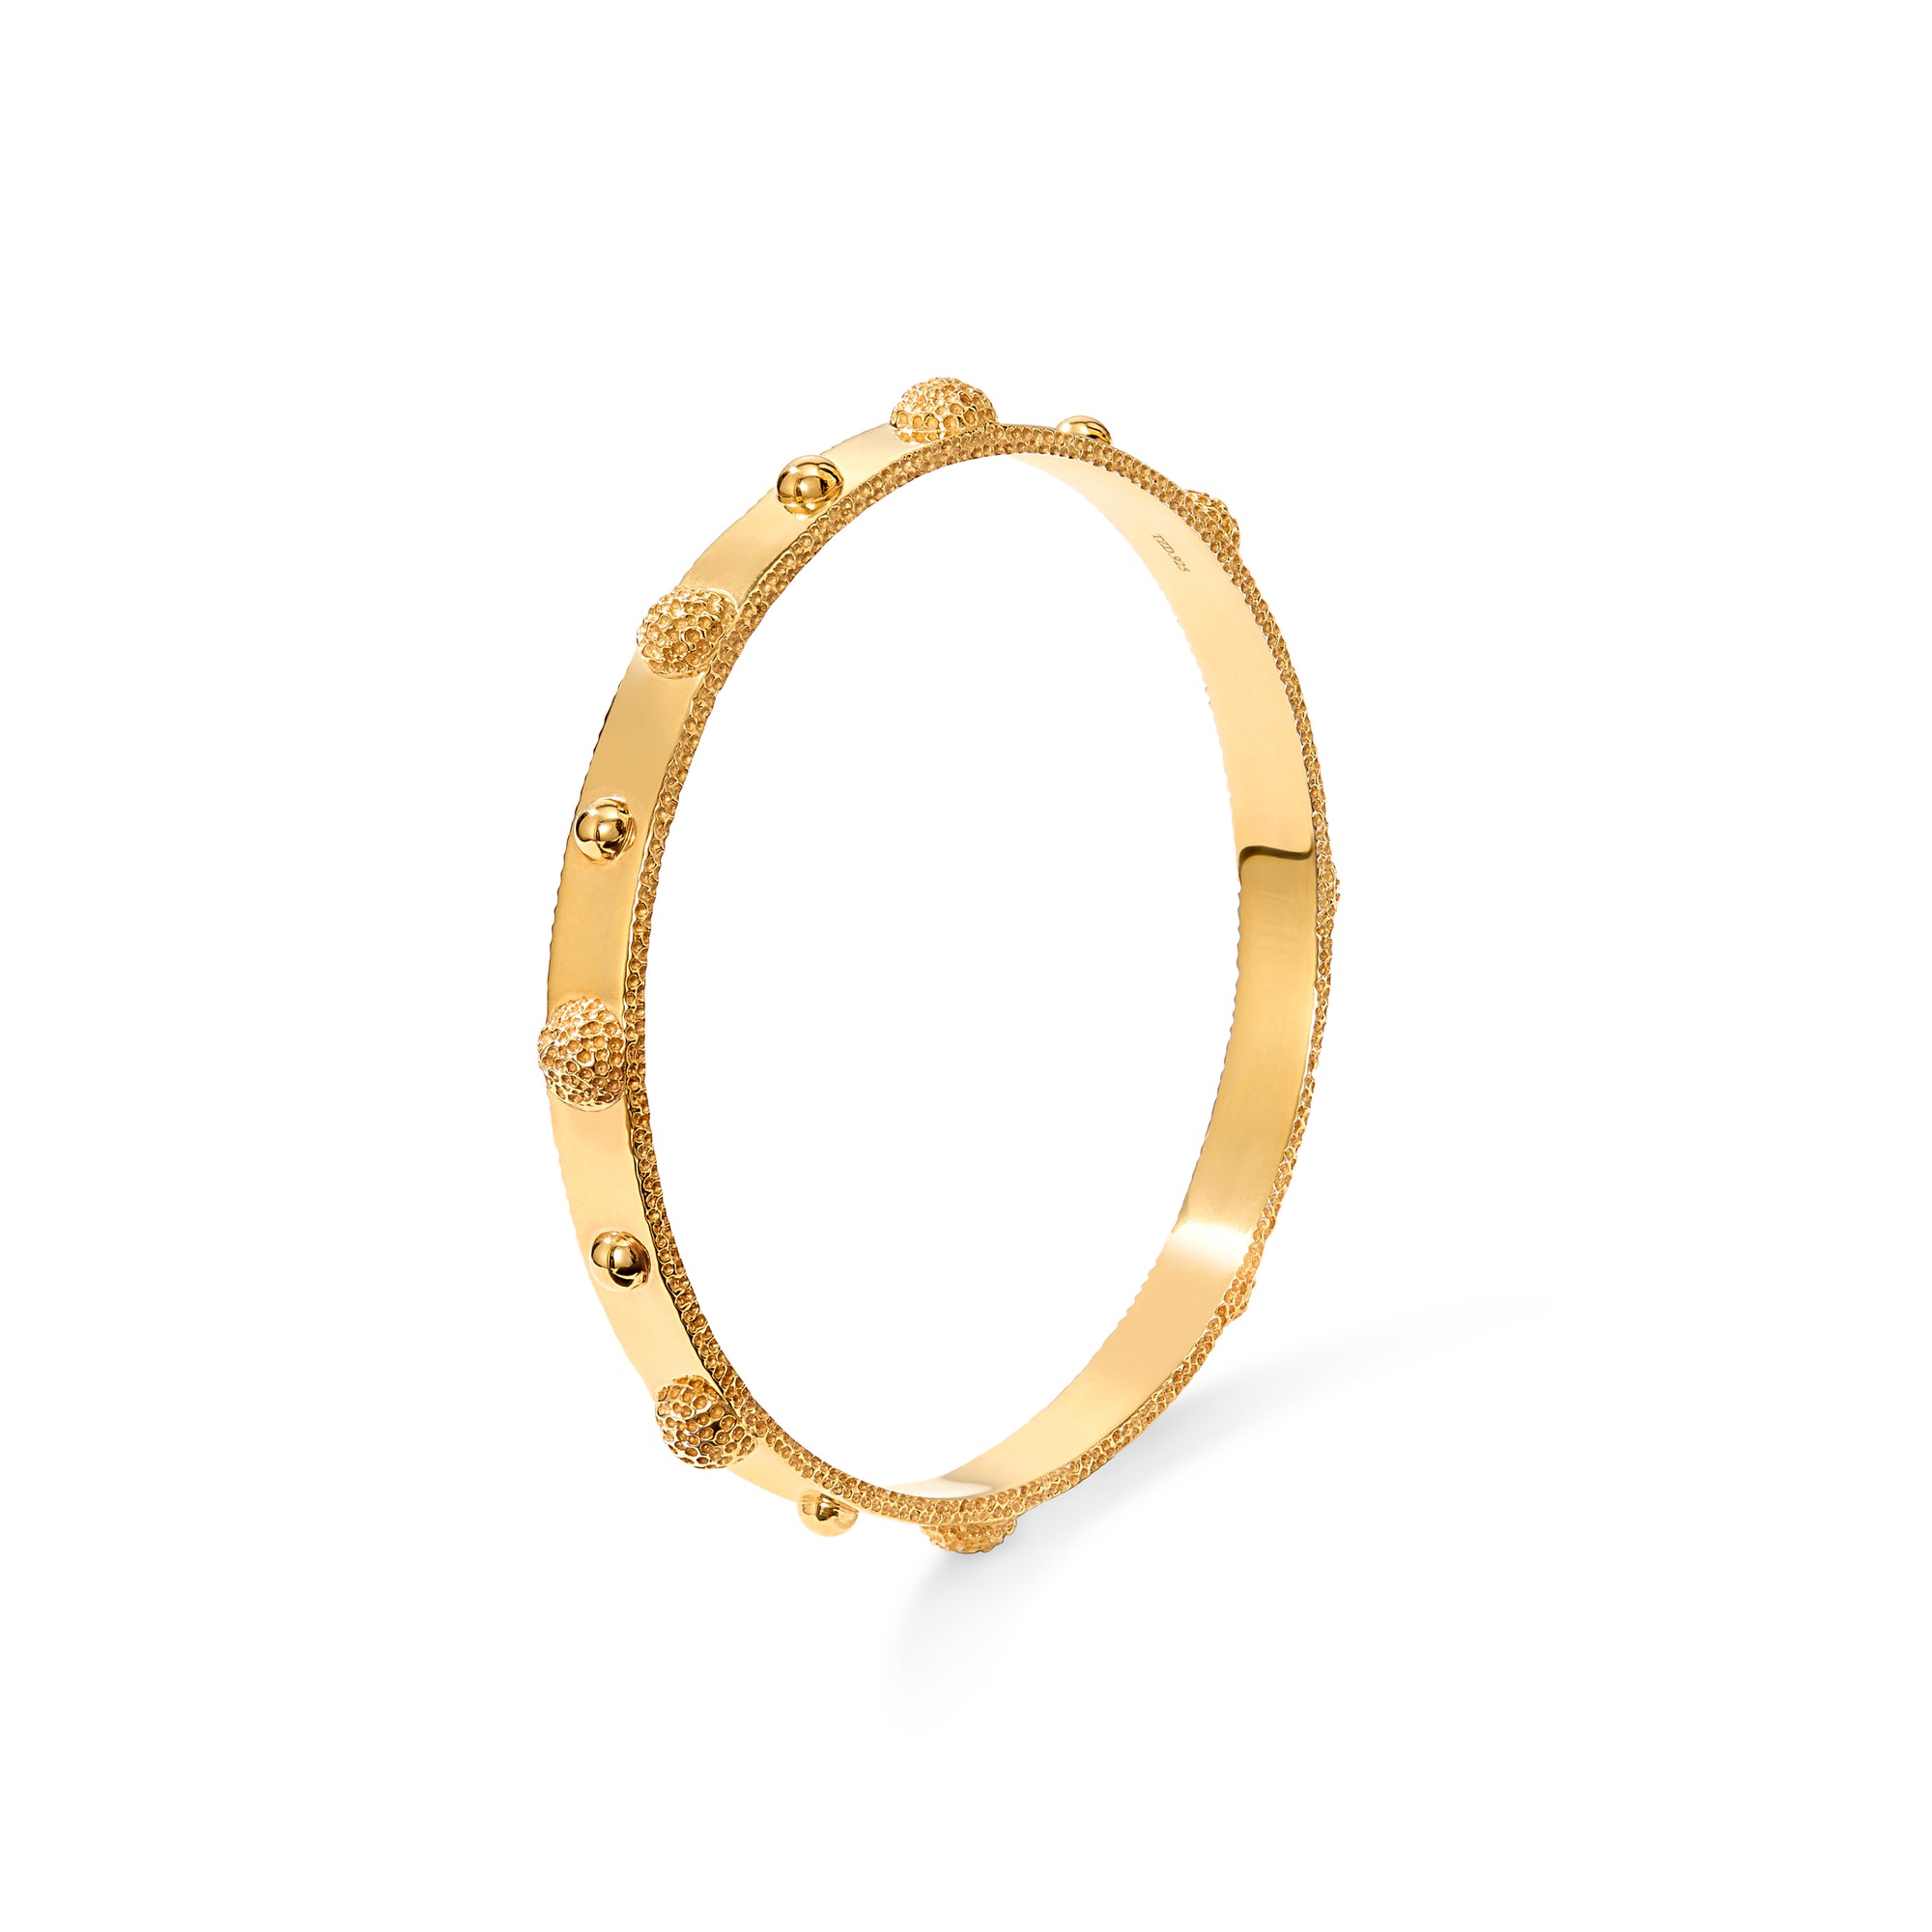 The PLANETS ALIGN Bracelet Gold Plated